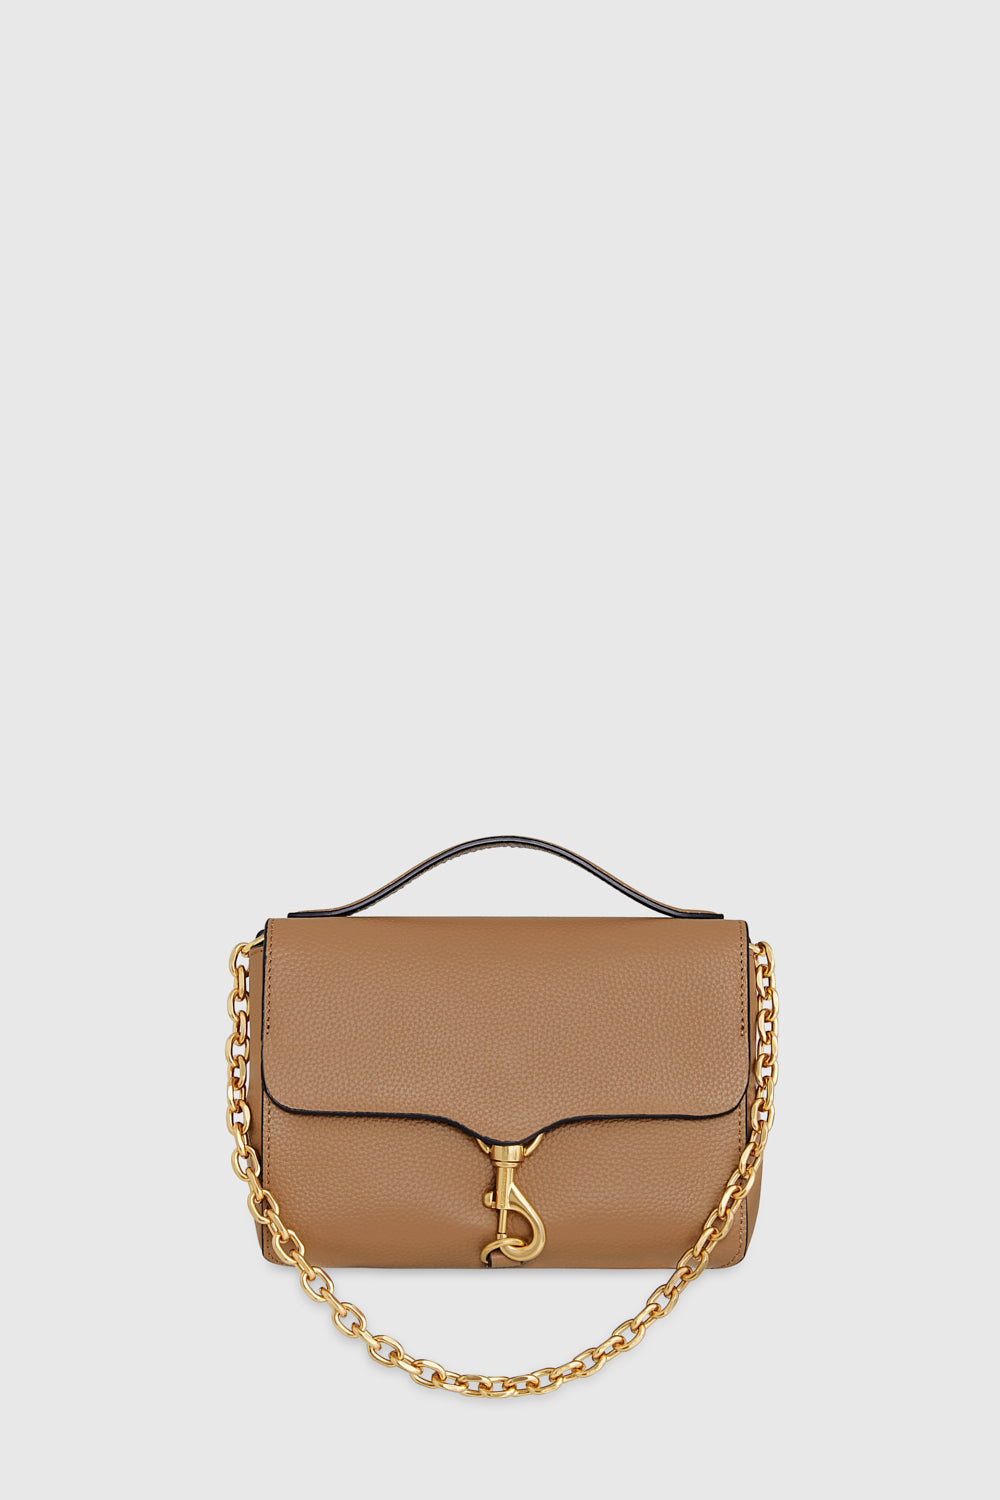 Shop Rebecca Minkoff Megan Top Handle With Chain Bag In Saddle